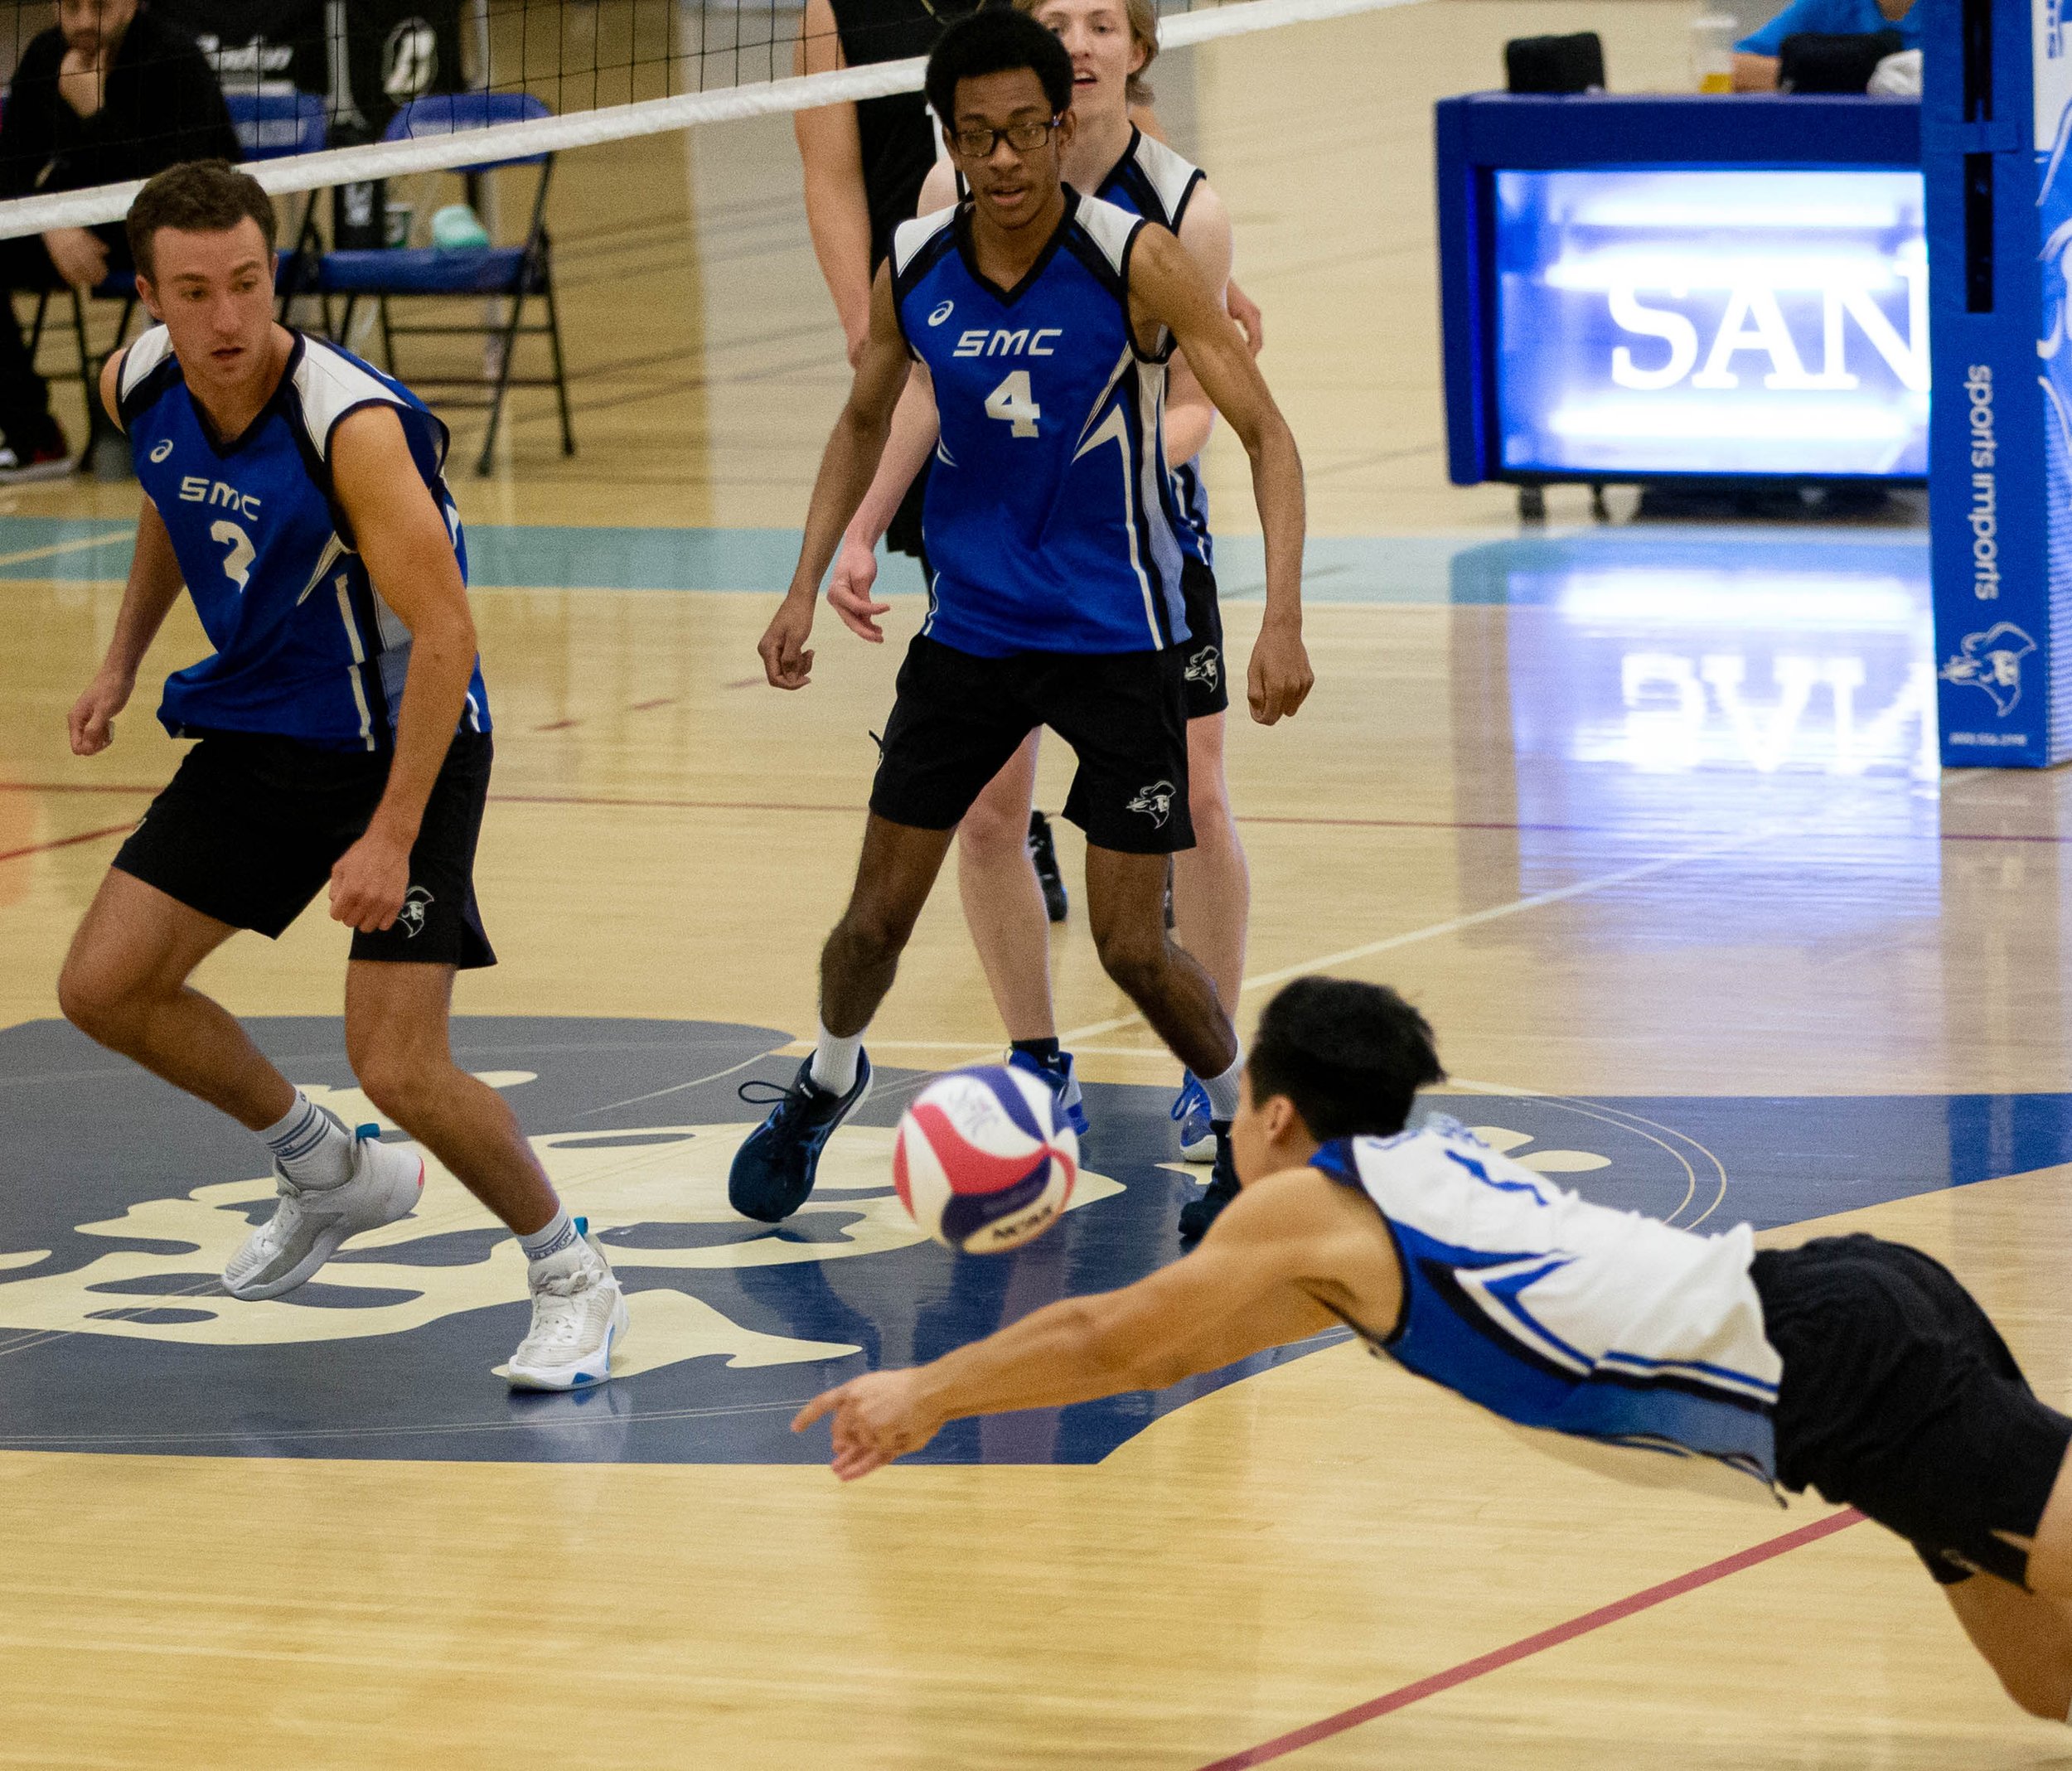  Santa monica College(SMC) Corsairs libero Javier Castillo(7) diving for the ball as Kane Schwengel(2) and Beikwaw Yankey(4) prepare to set to ball to be hit towards L.A. Pierce Colleges side of the court on Wed. March 15, 2023 in the SMC Pavillion a